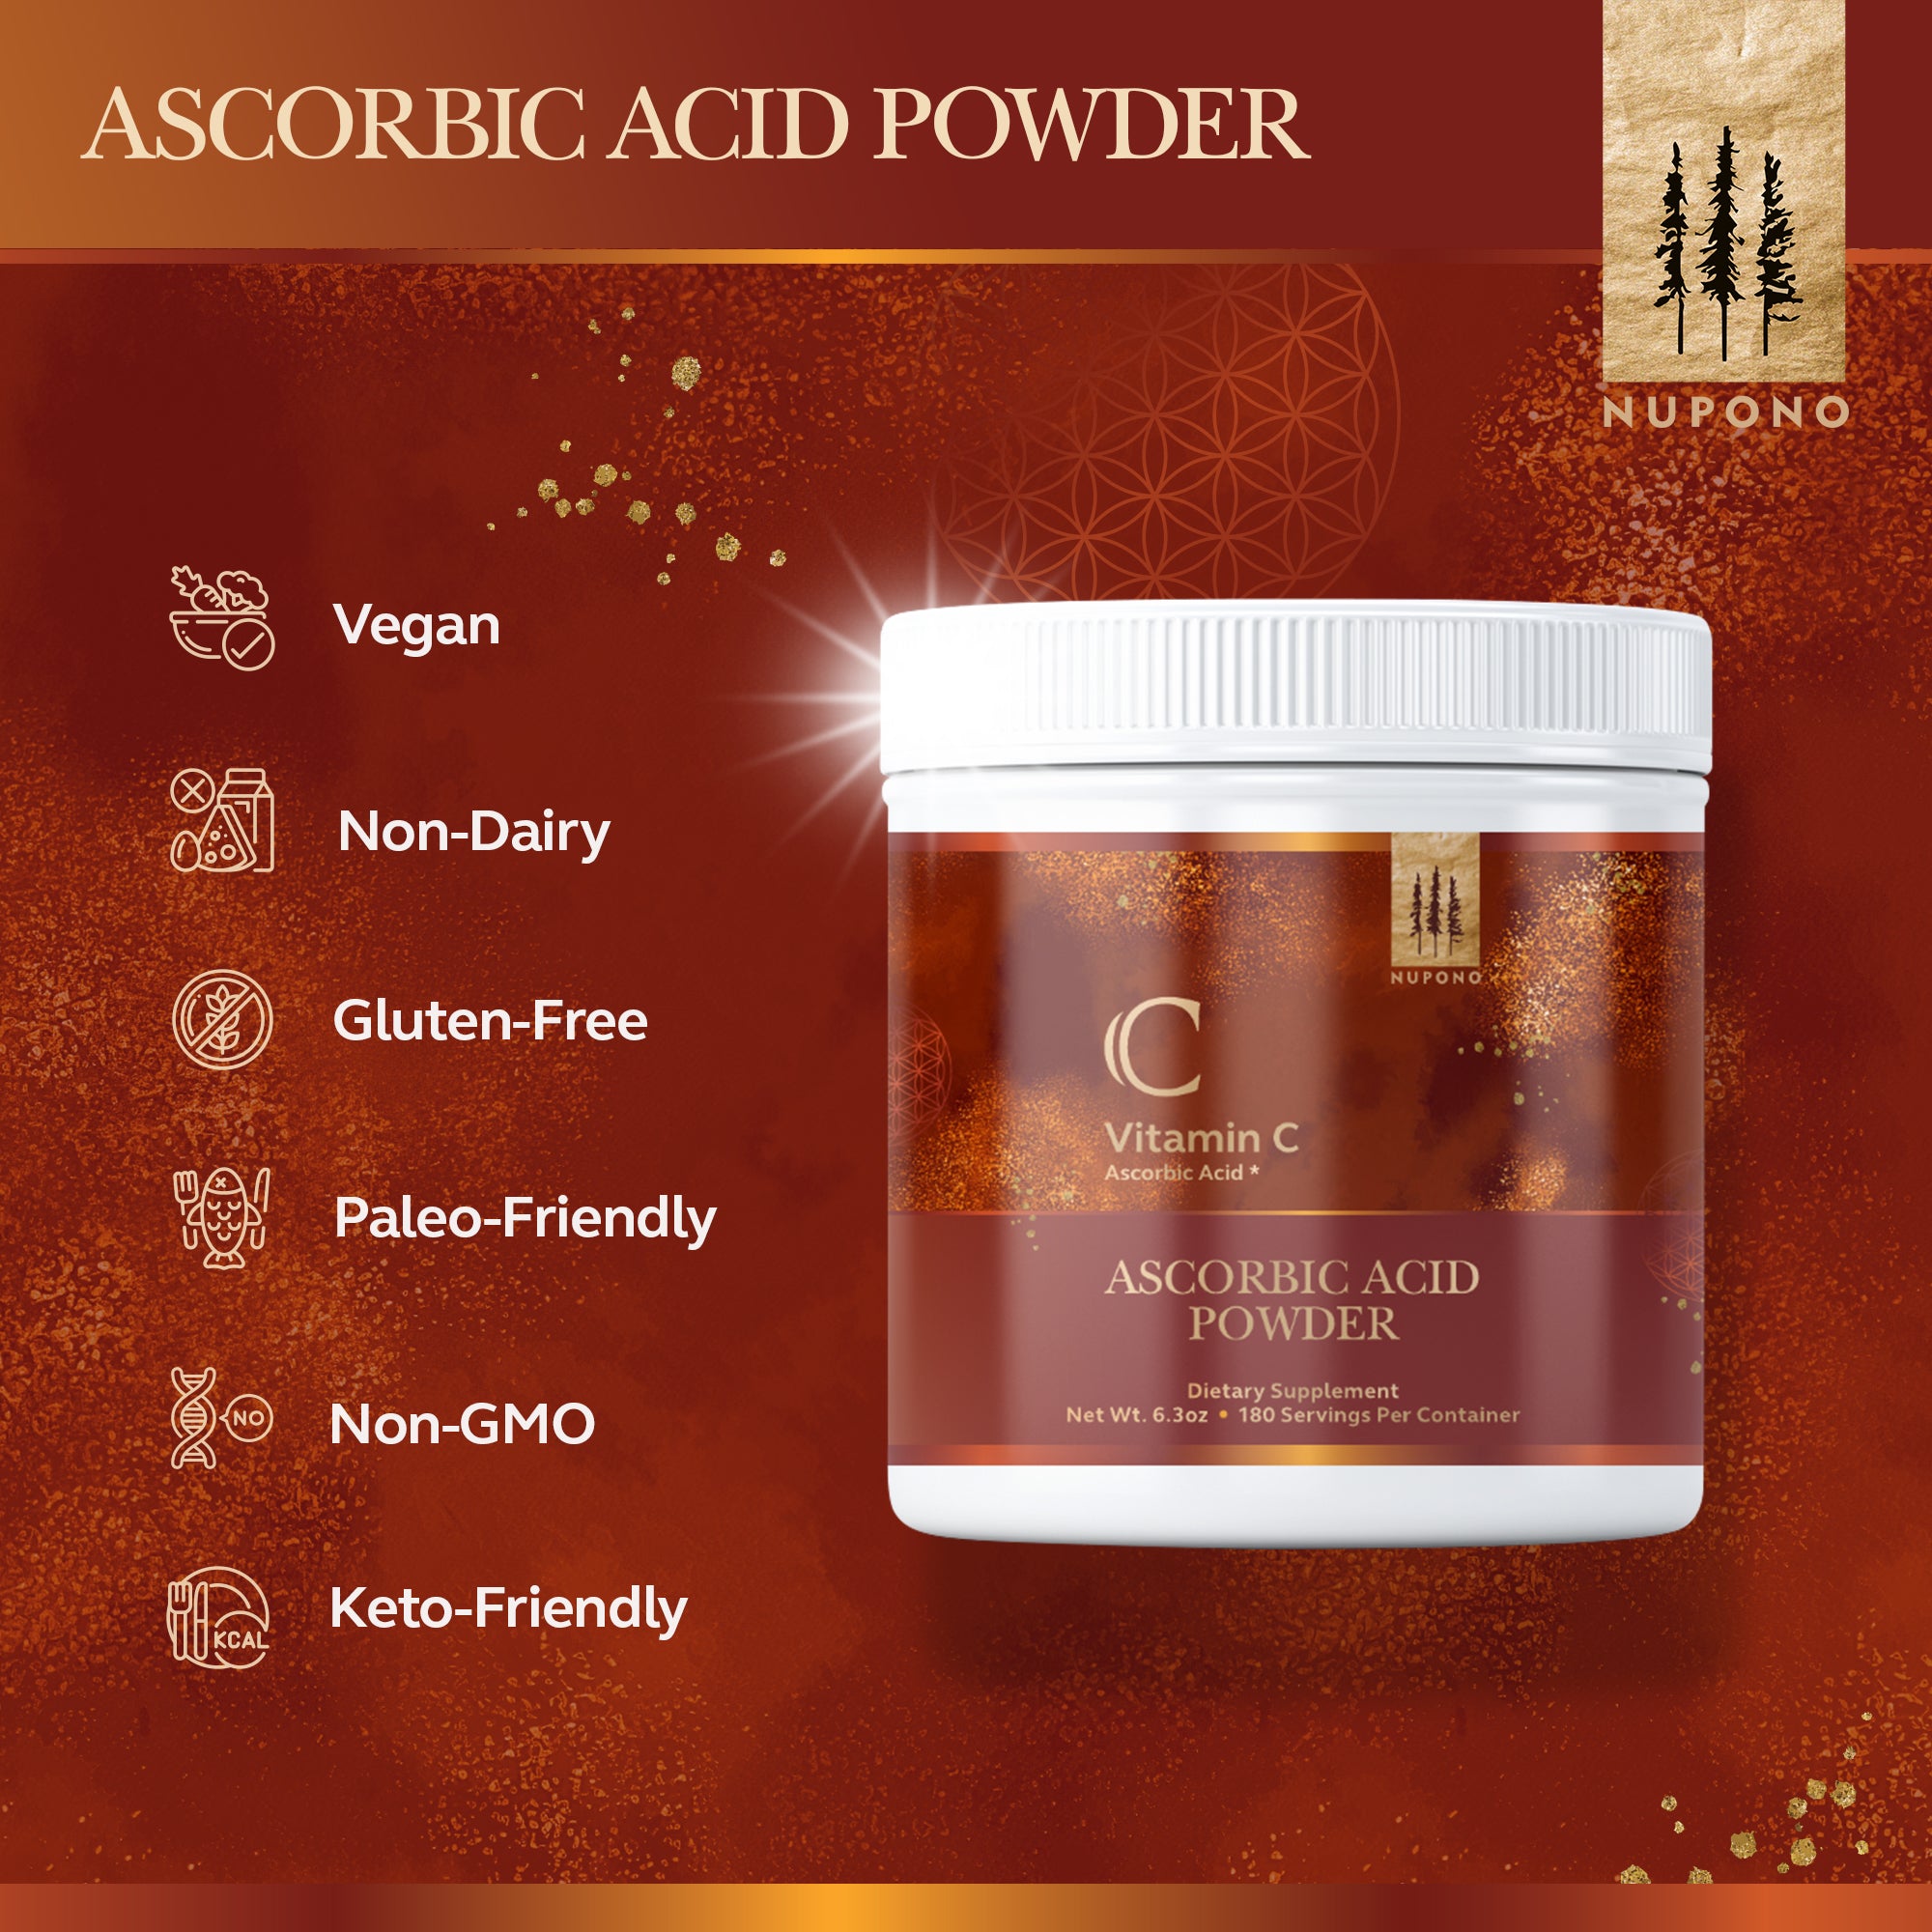 Ascorbic Acid Formula 180 Servings- Supports Health and Well-being, Boosts Immunity 100% Pure Vitamin C, Reduce Blood Uric Acid Levels